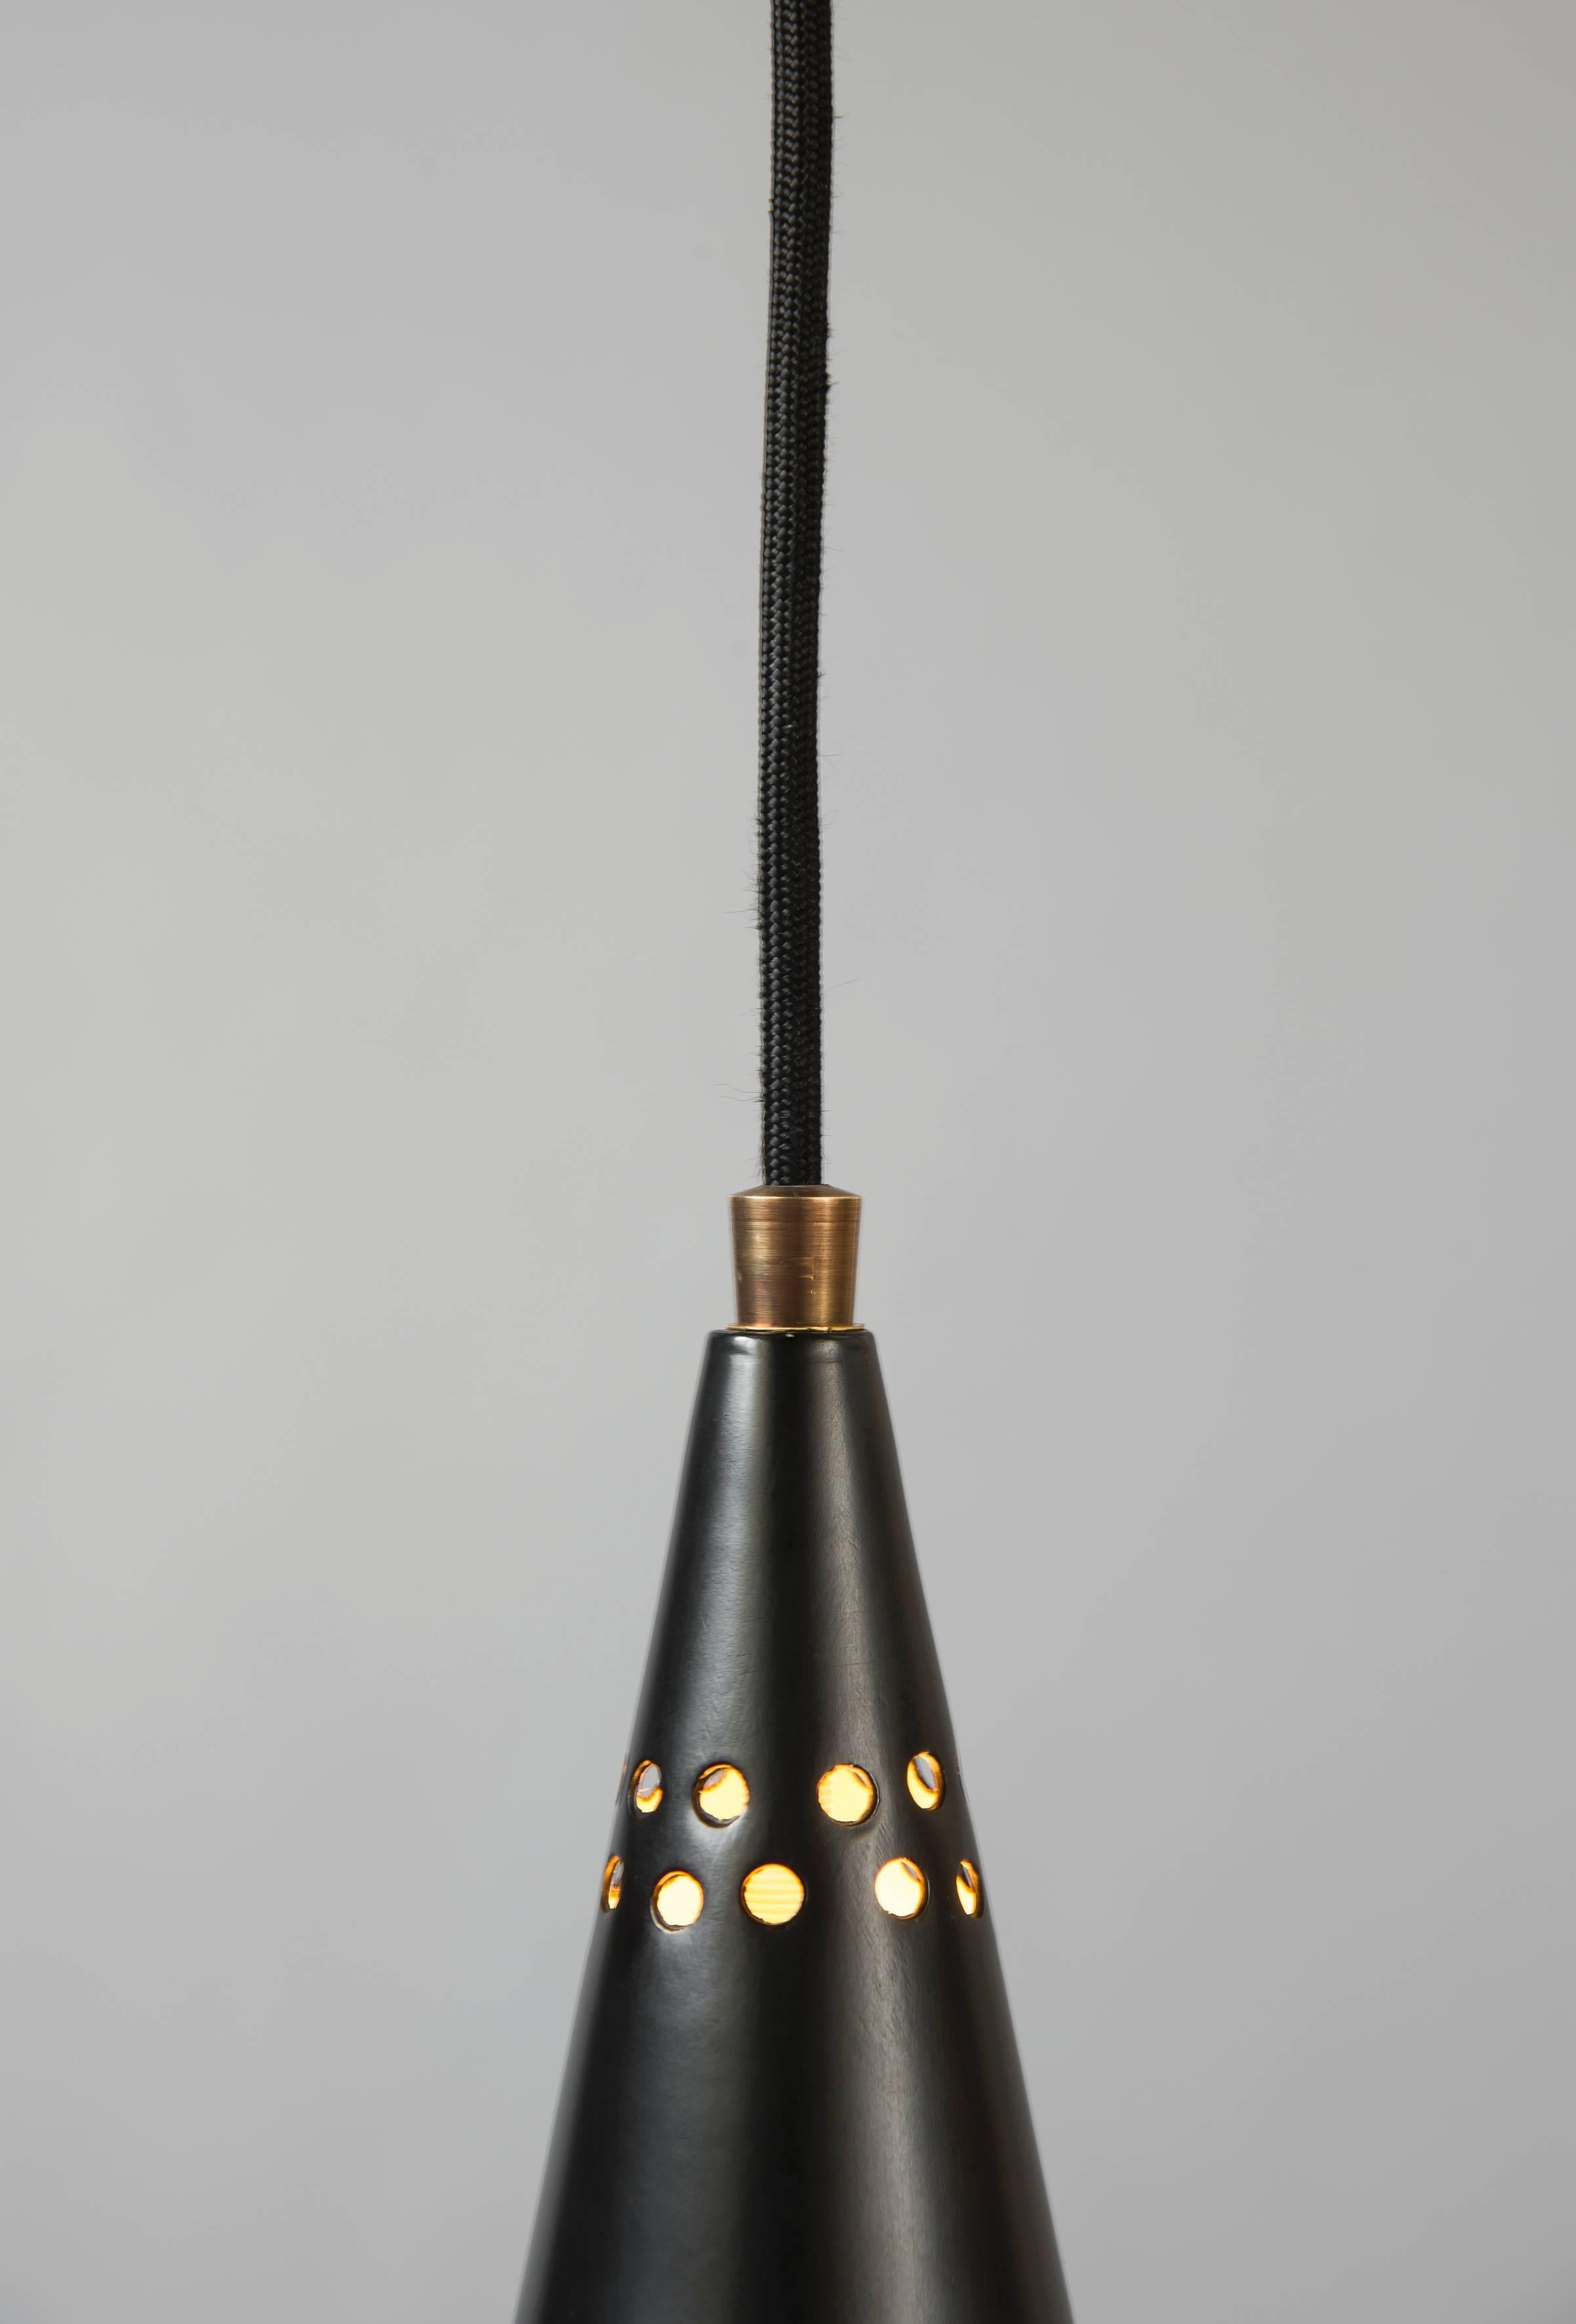 Pair of ceiling lights 215 by Jacques Biny
Jacques Biny/Luminalite Edition - 1956-1957.